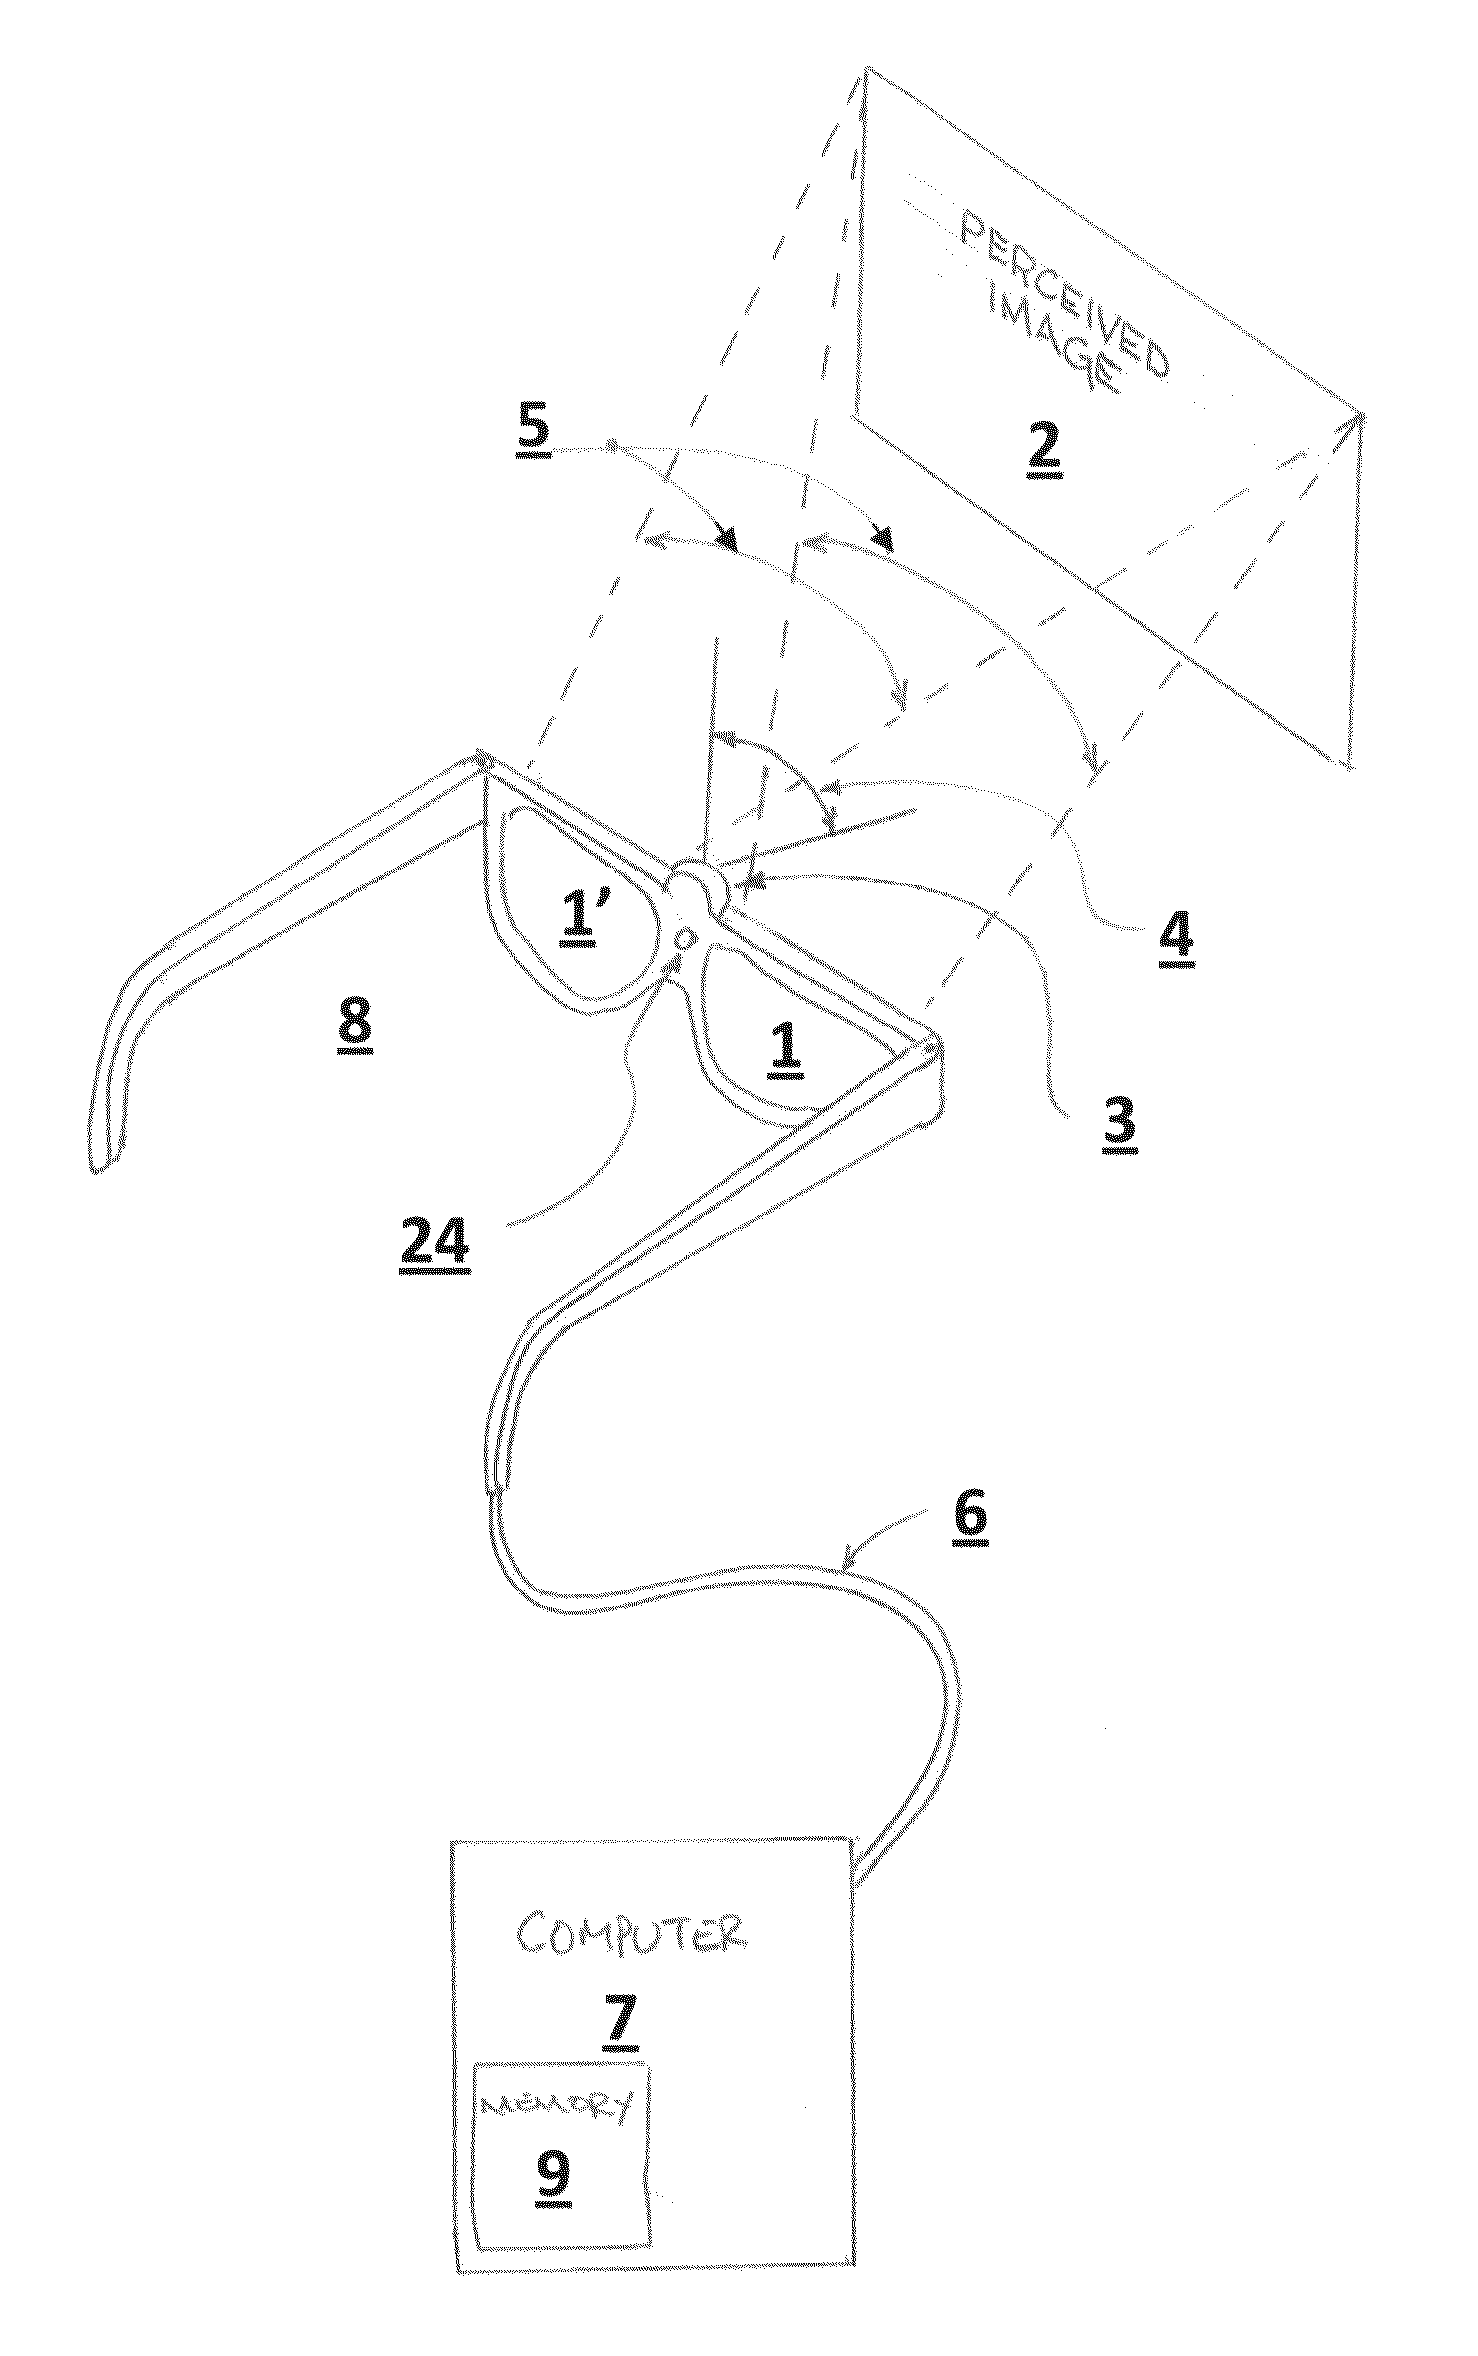 Apparatus and Method for a Dynamic "Region of Interest" in a Display System